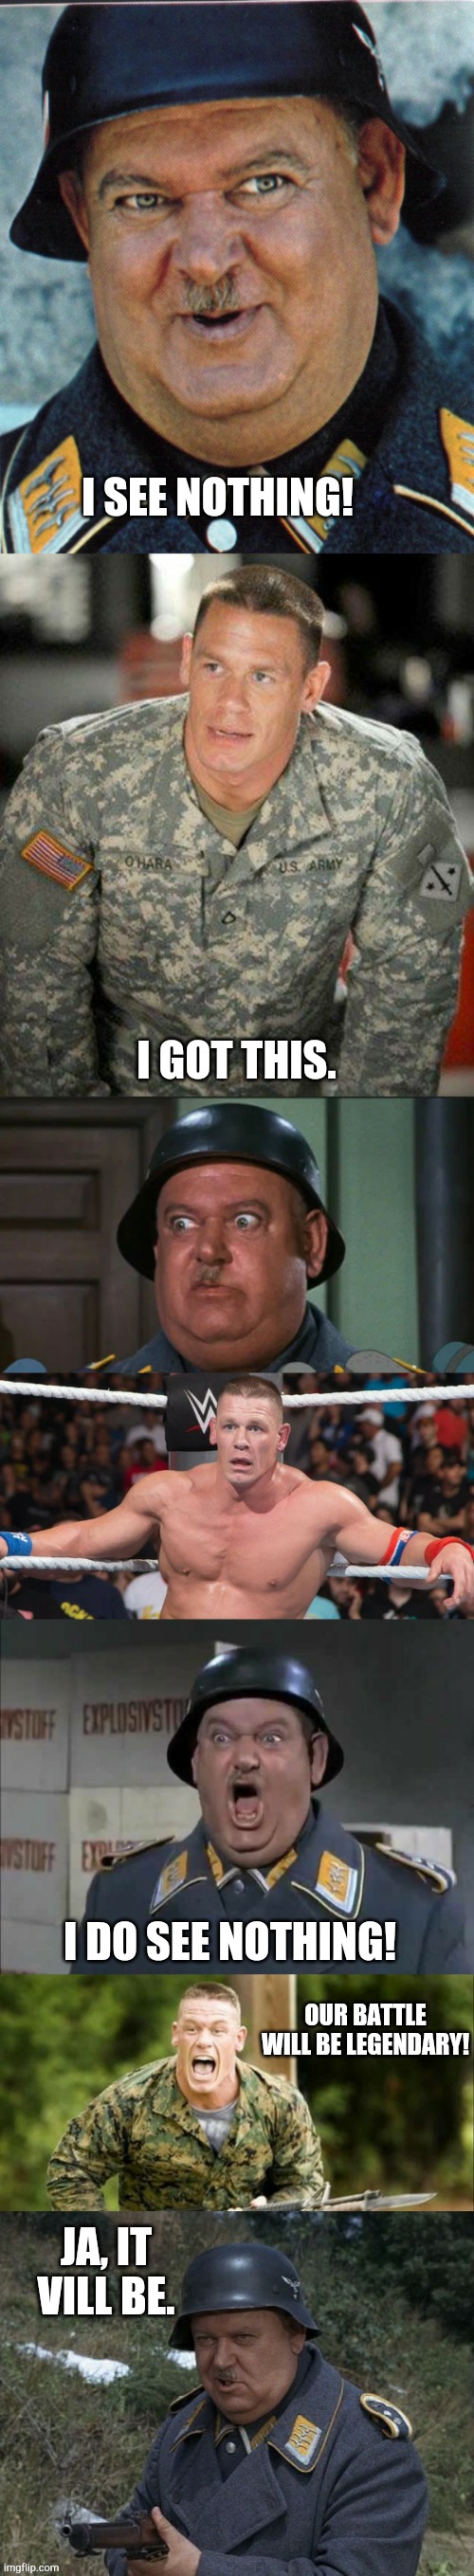 John Cena and Sergeant Schultz | I SEE NOTHING! I GOT THIS. I DO SEE NOTHING! OUR BATTLE WILL BE LEGENDARY! JA, IT VILL BE. | image tagged in john cena and sergeant schultz sequence | made w/ Imgflip meme maker